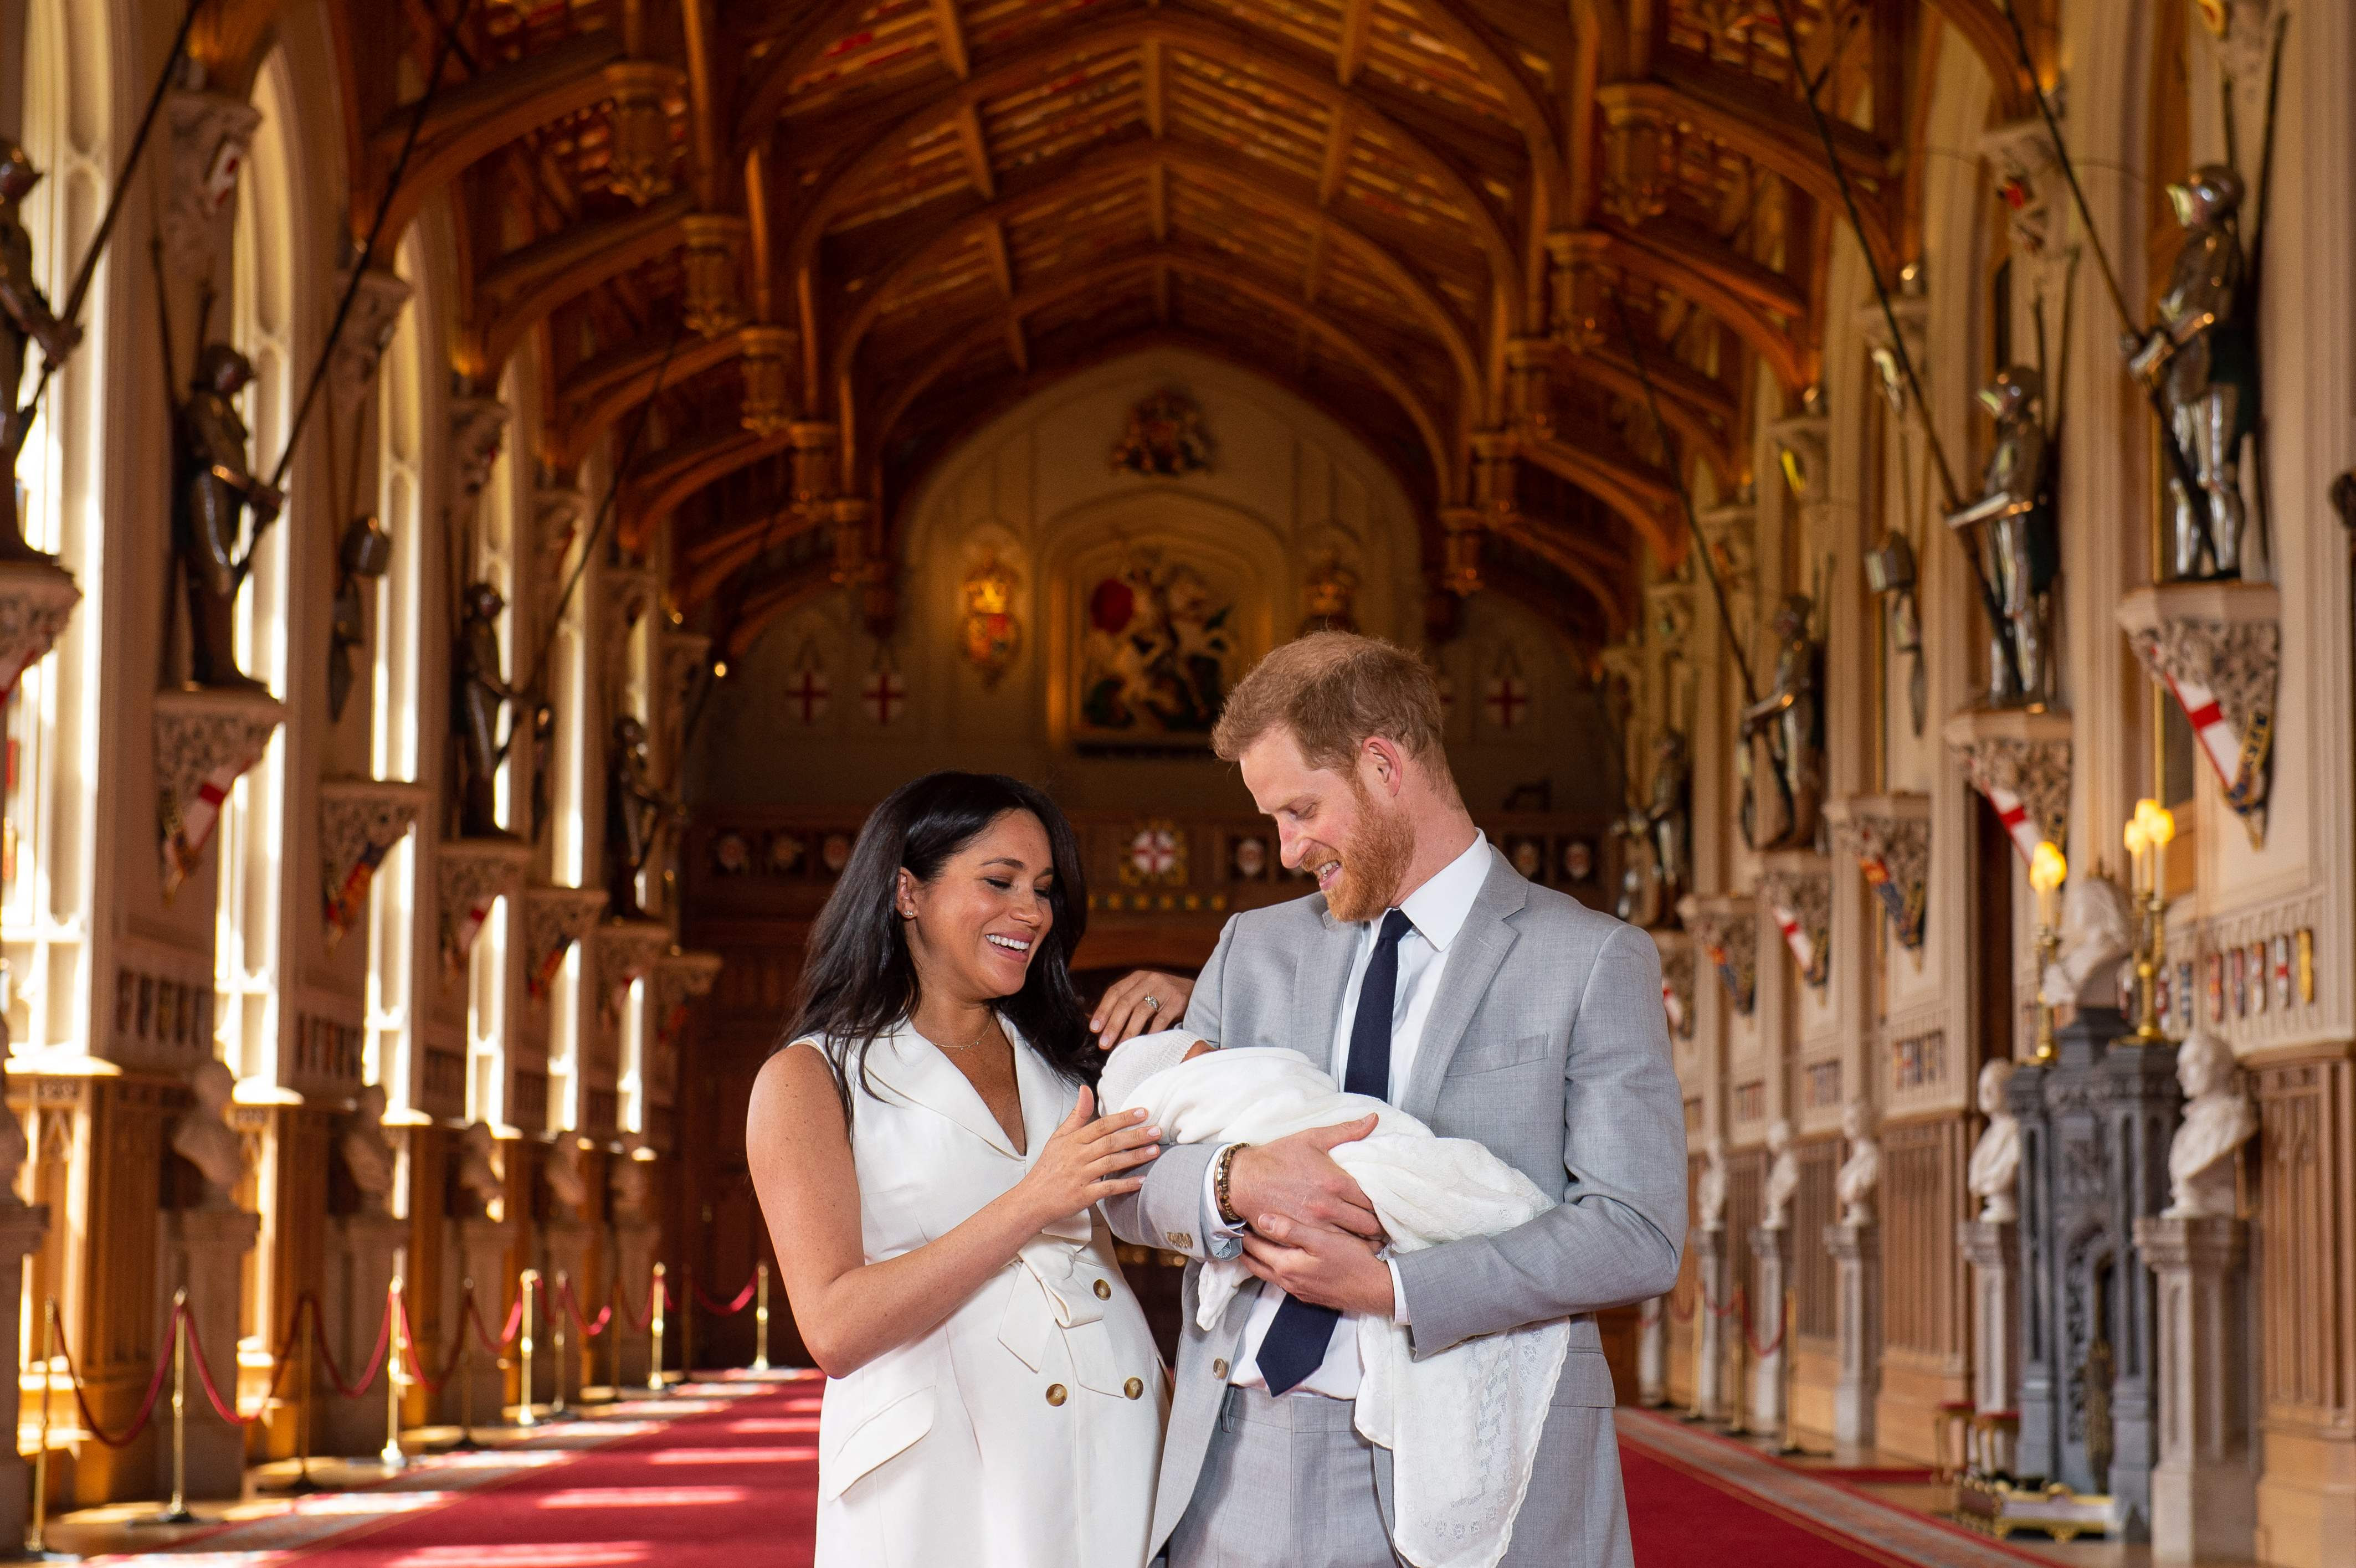 Meghan and Harry, who introduced Archie in May 2019, said there were concerns about how dark their baby's skin would be